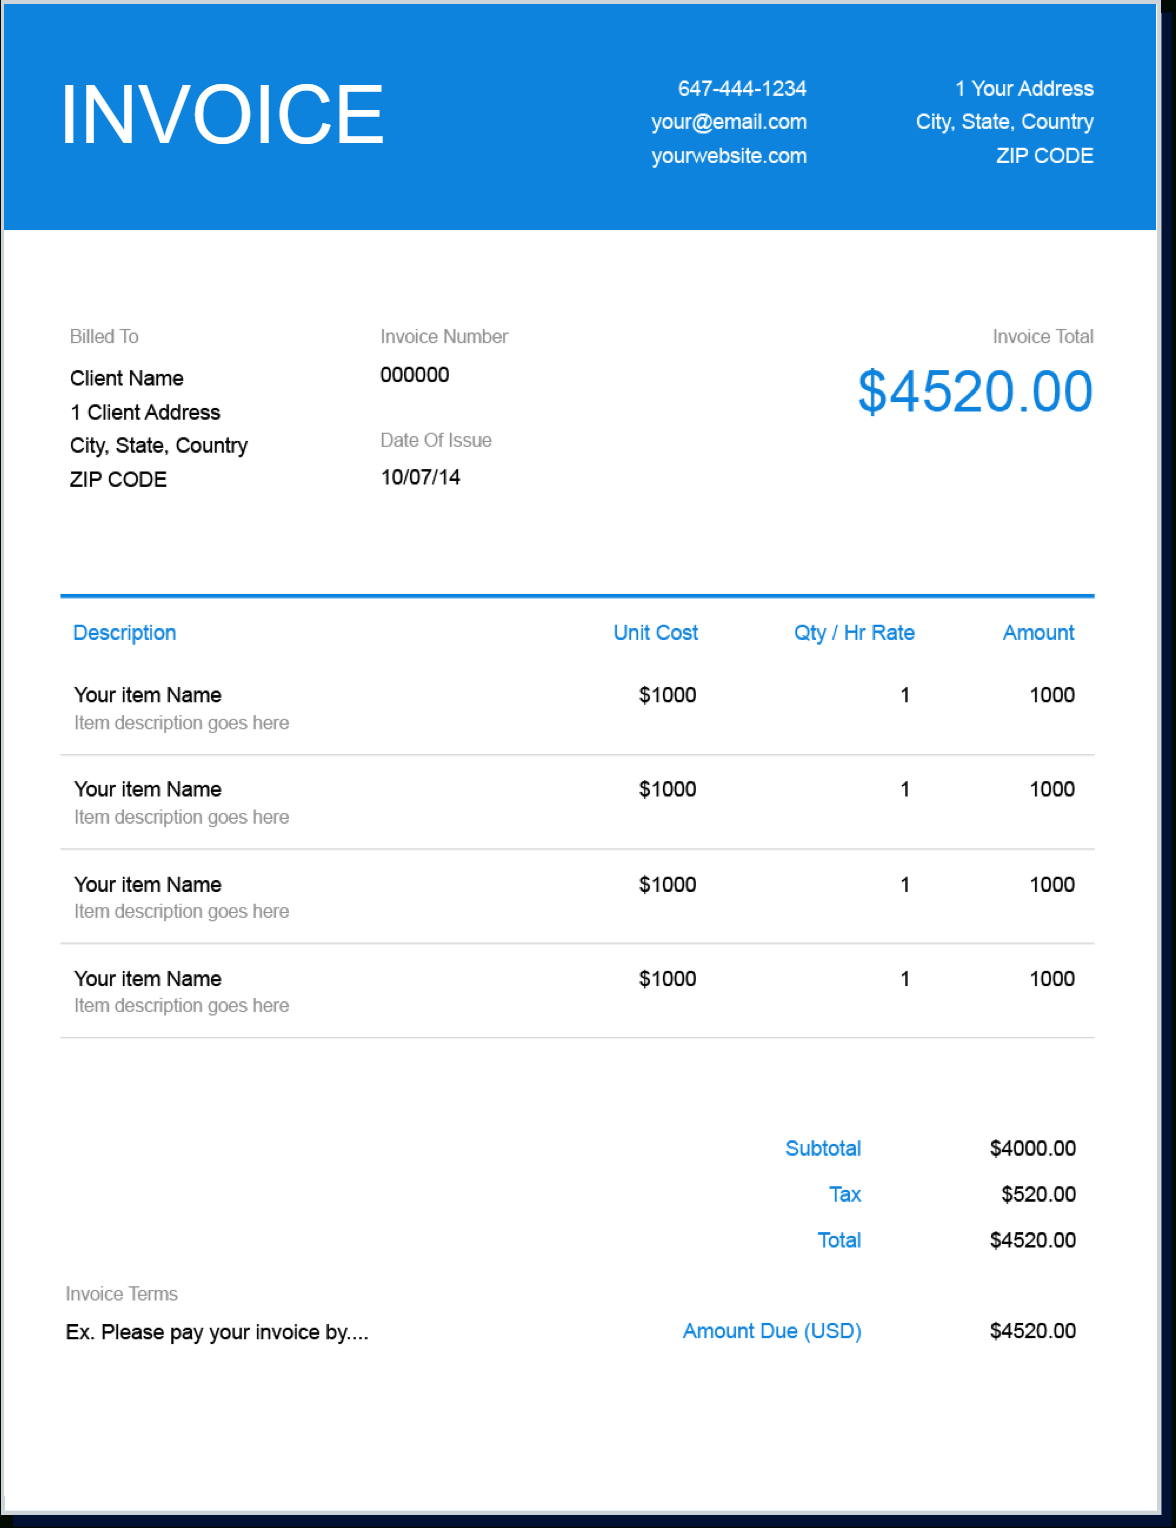 Invoice Template | Create And Send Free Invoices Instantly Inside Free Downloadable Invoice Template For Word